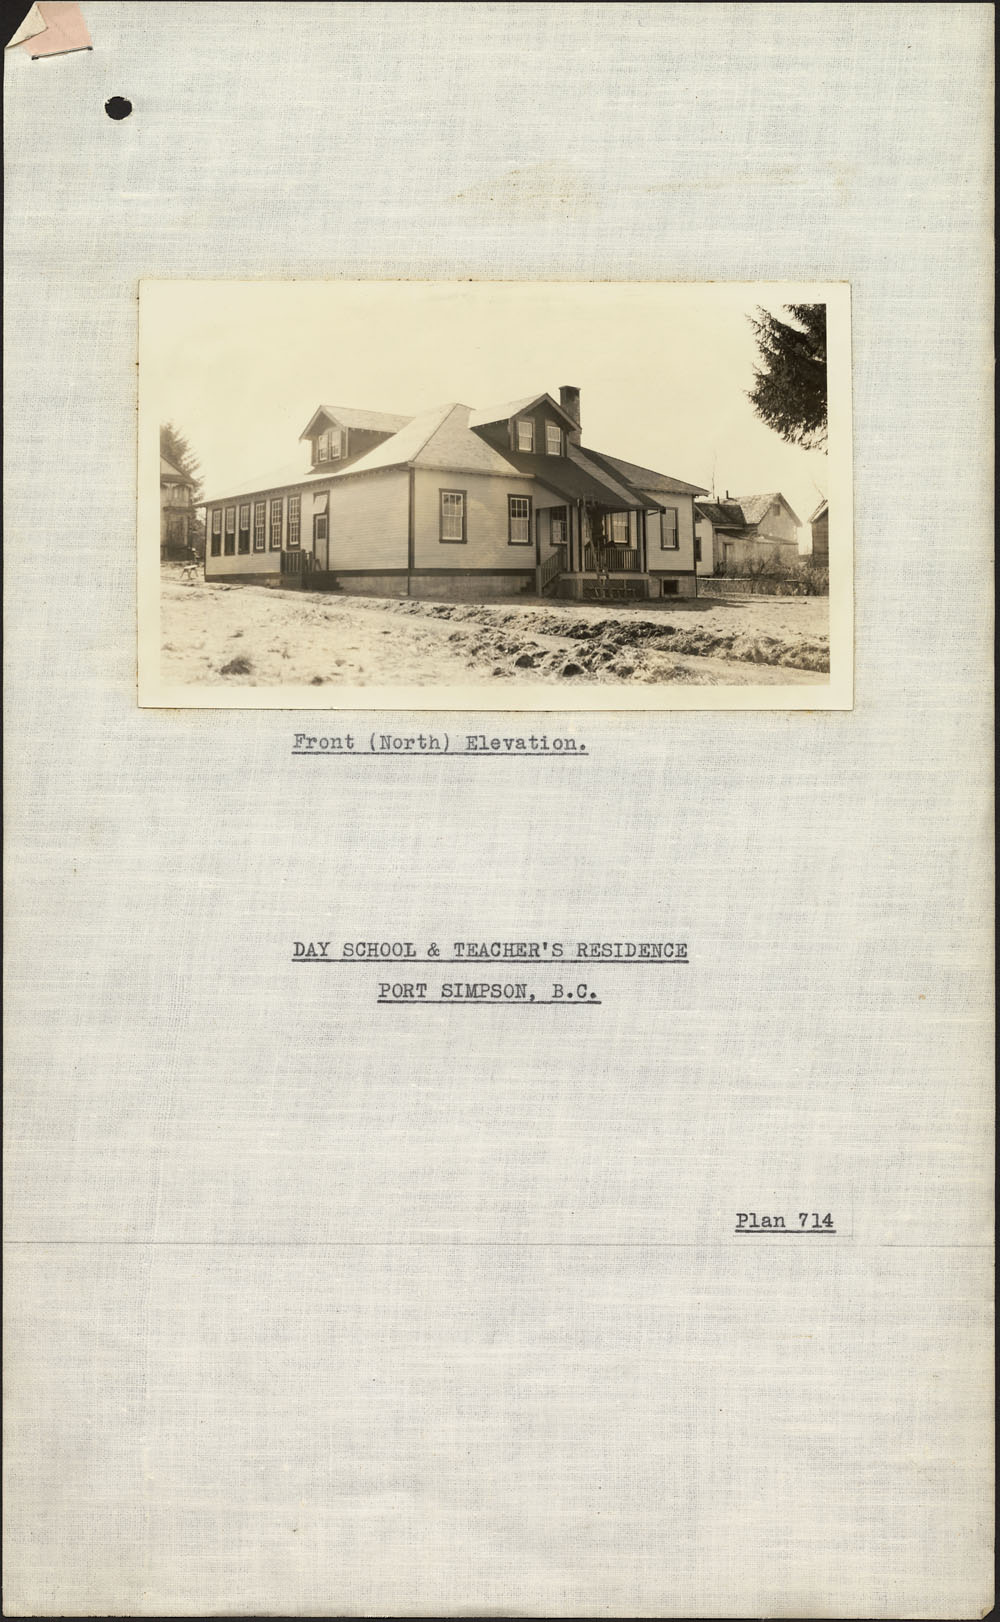 Port Simpson Indian Day School and teachers' residence, 1939